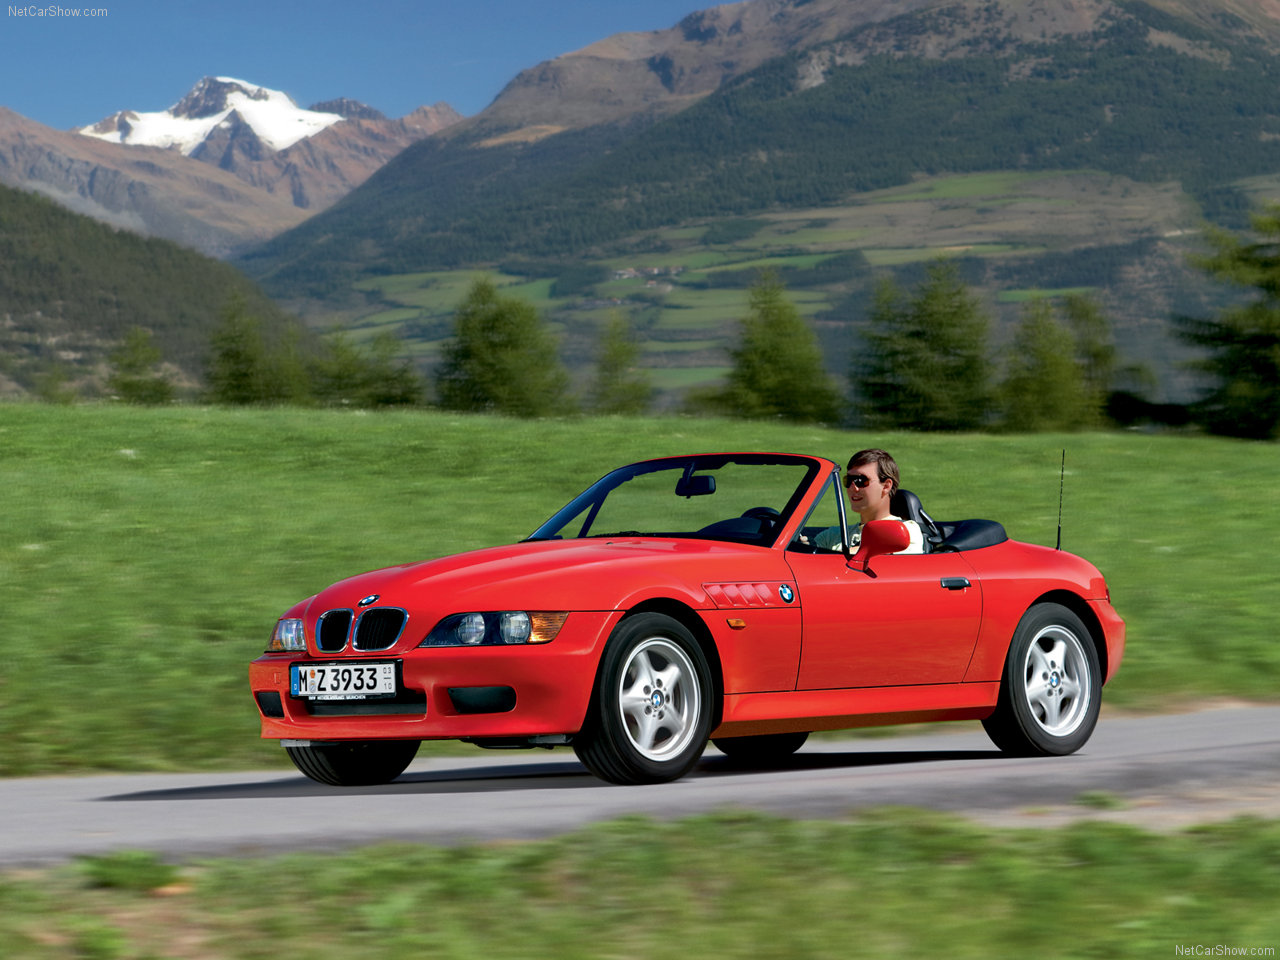 launching the bmw z3 roadster case solution